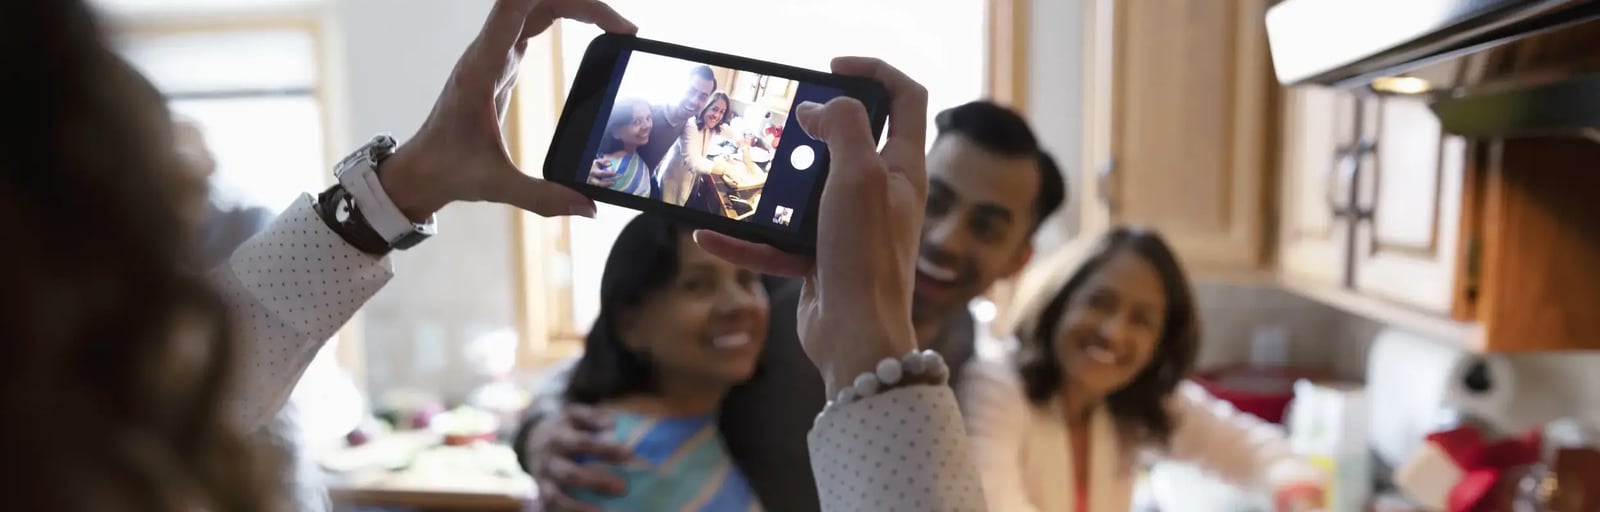 A woman is holding her phone taking a picture of a family group preparing a meal in the kitchen